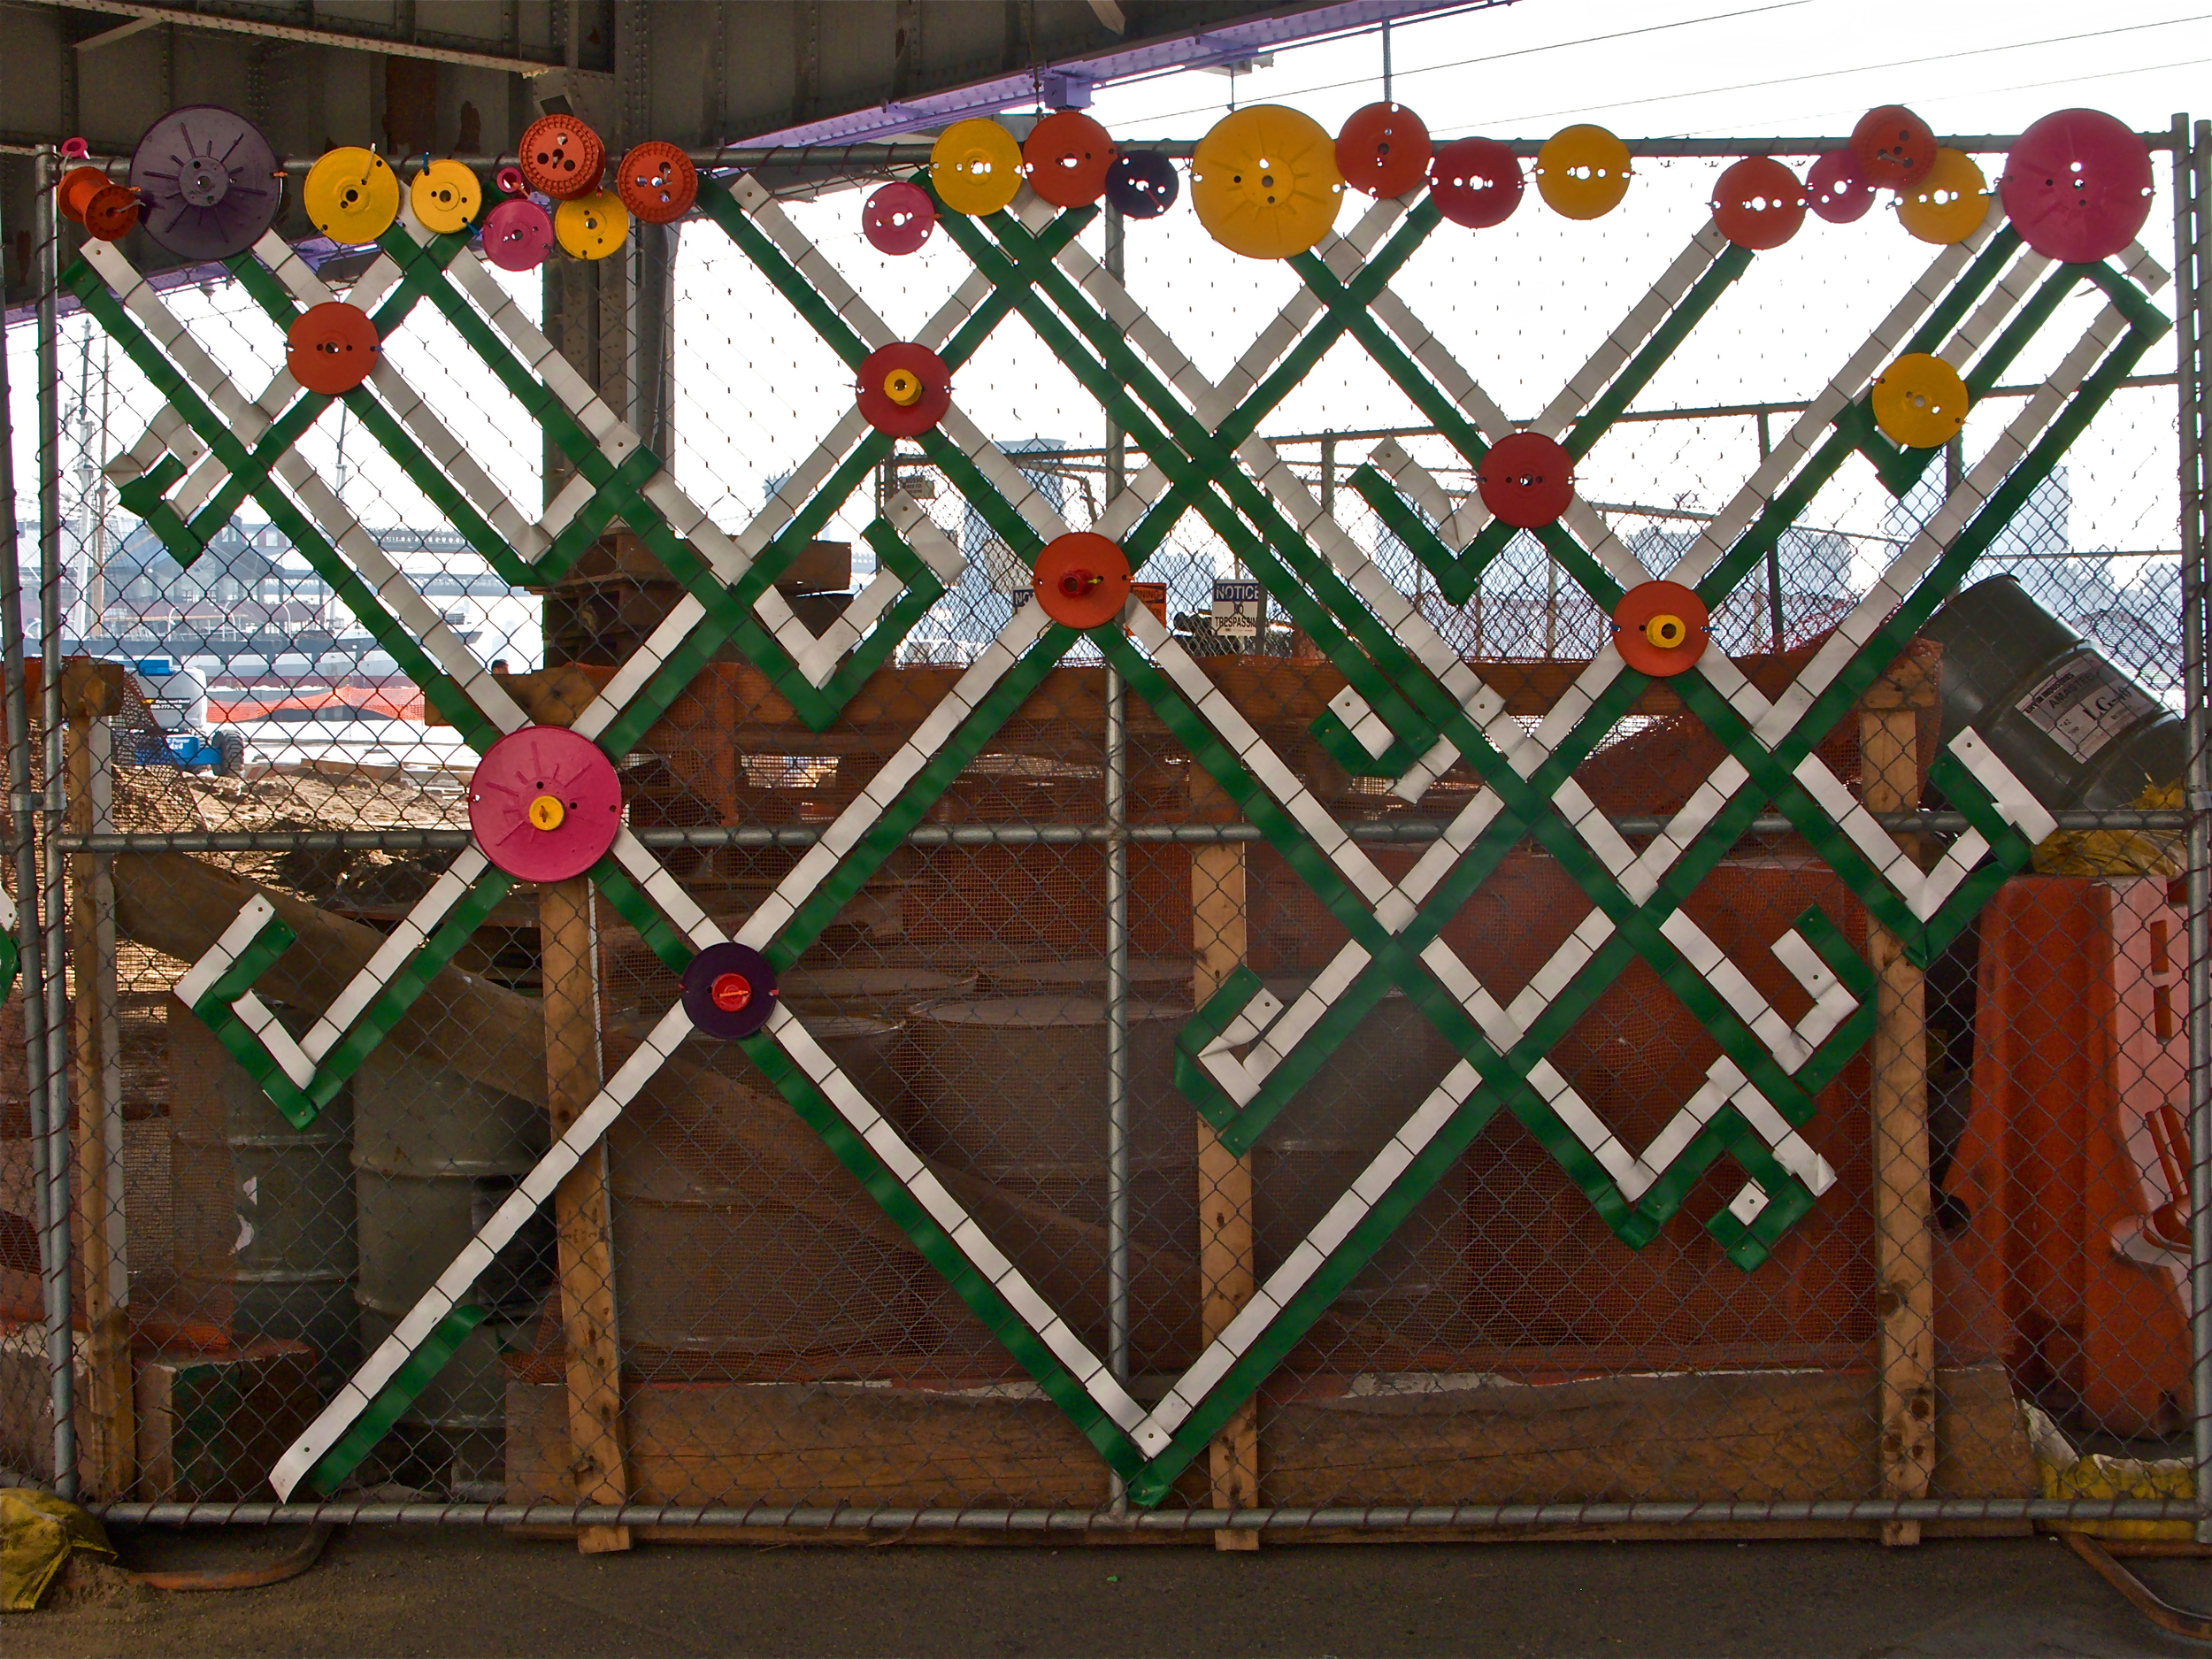 Fence Embroidery with Embellishment - detail